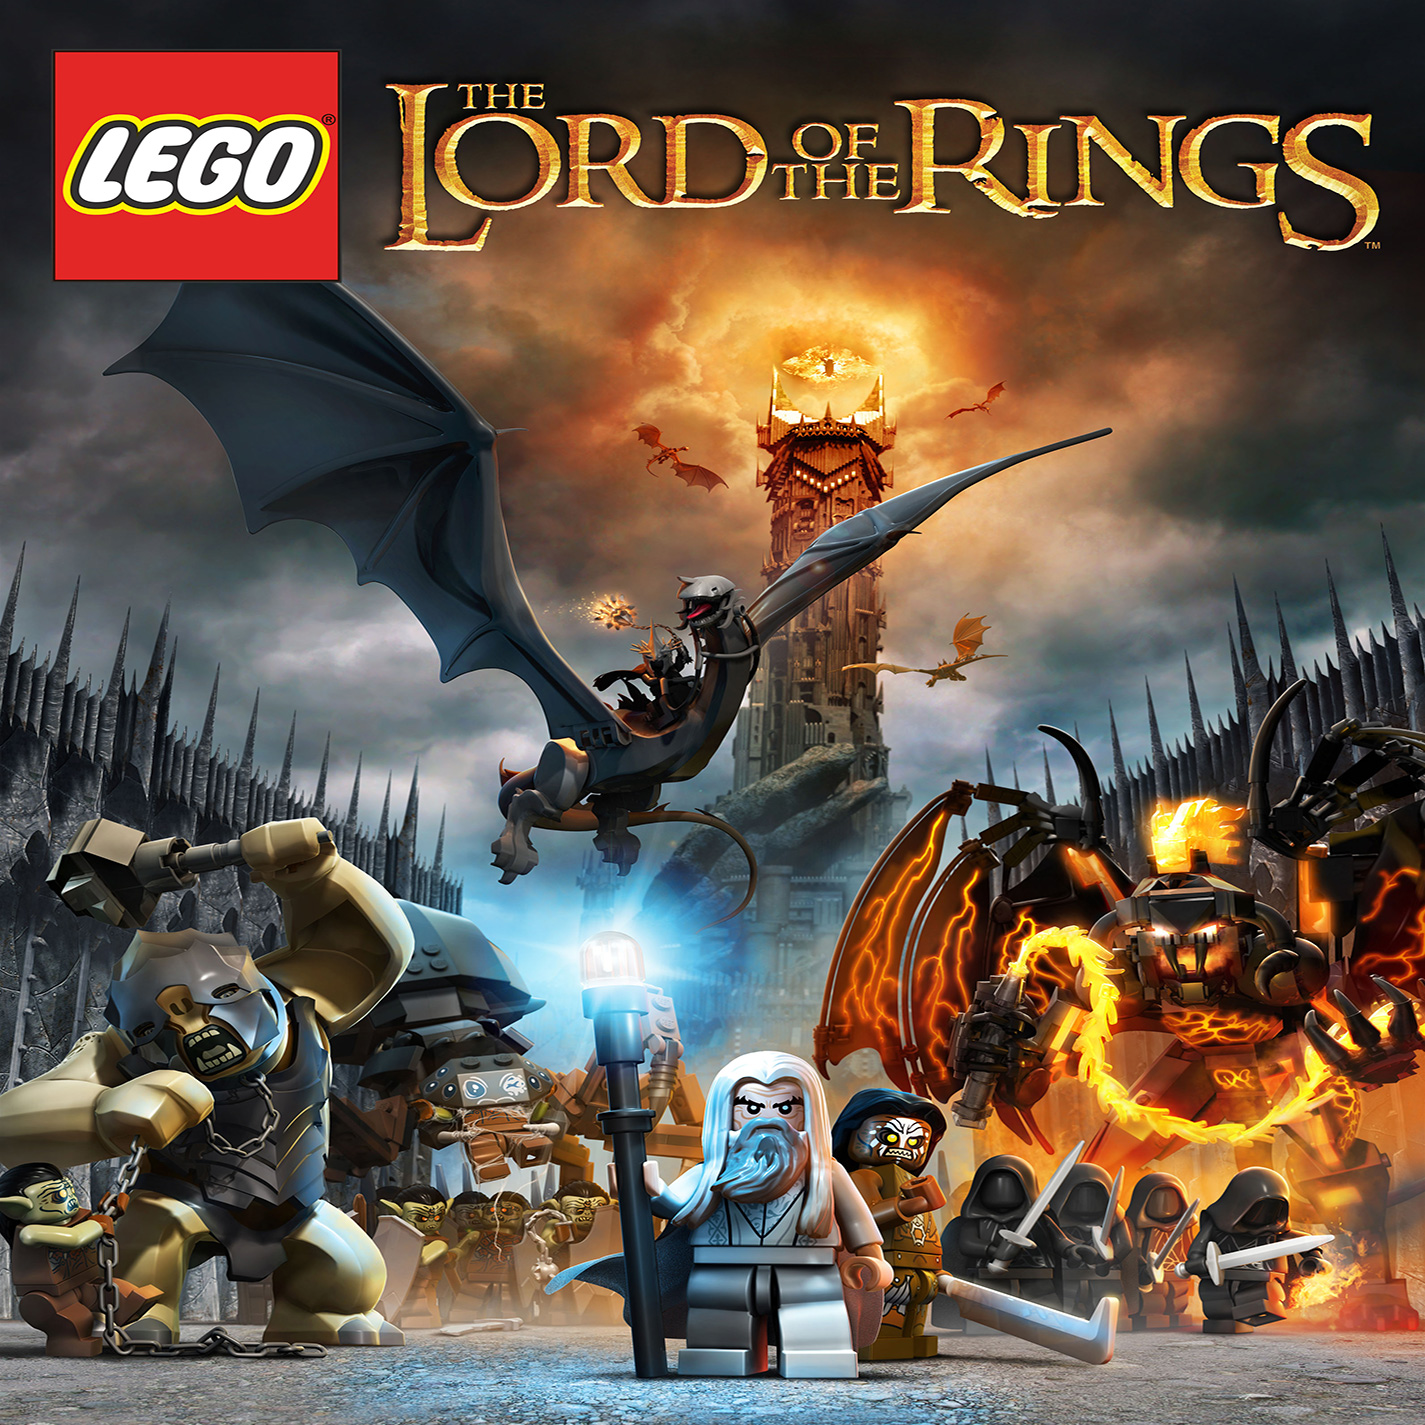 LEGO The Lord of the Rings - predn CD obal 2